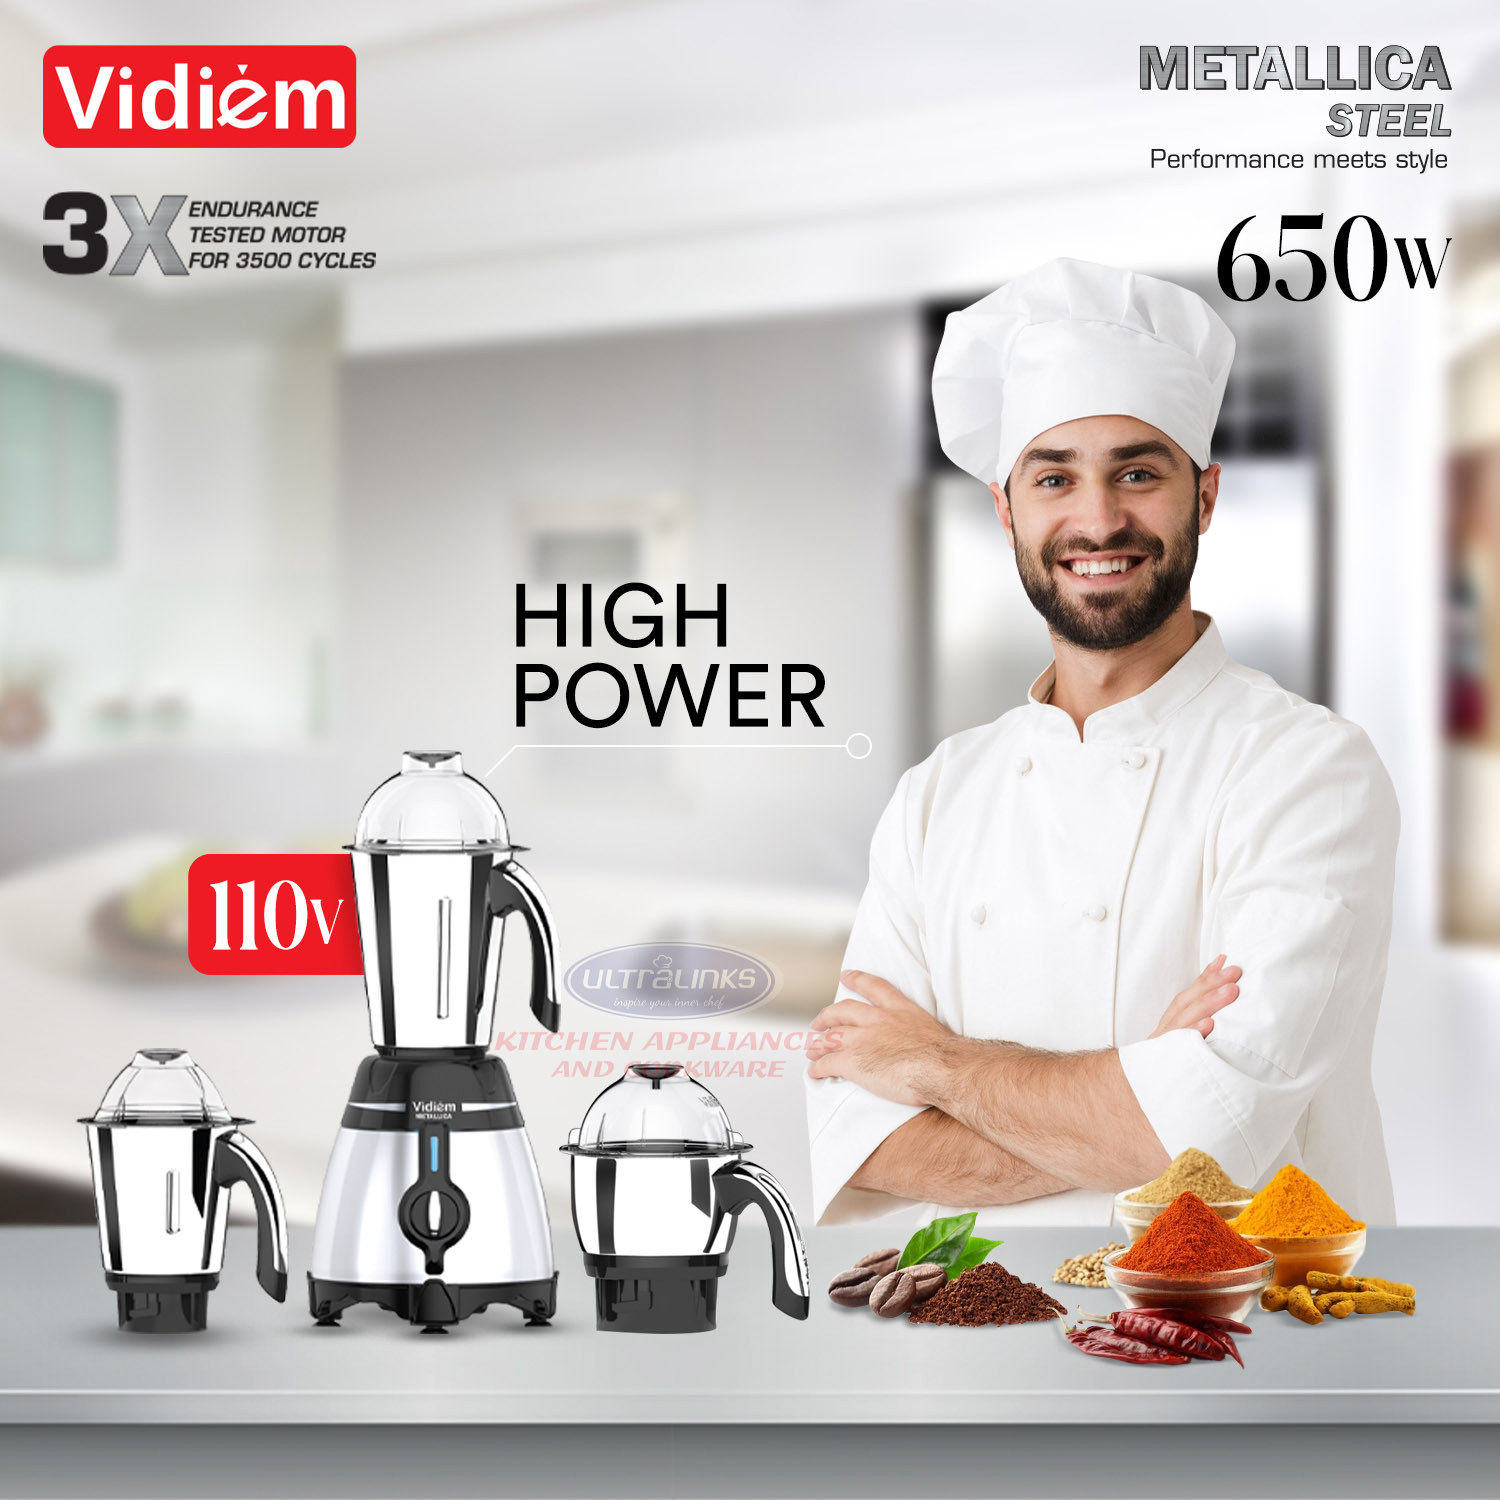 vidiem-metallica-steele-650w-110v-stainless-steel-jars-indian-mixer-grinder-with-spice-coffee-grinder-jar-for-use-in-canada-usa4